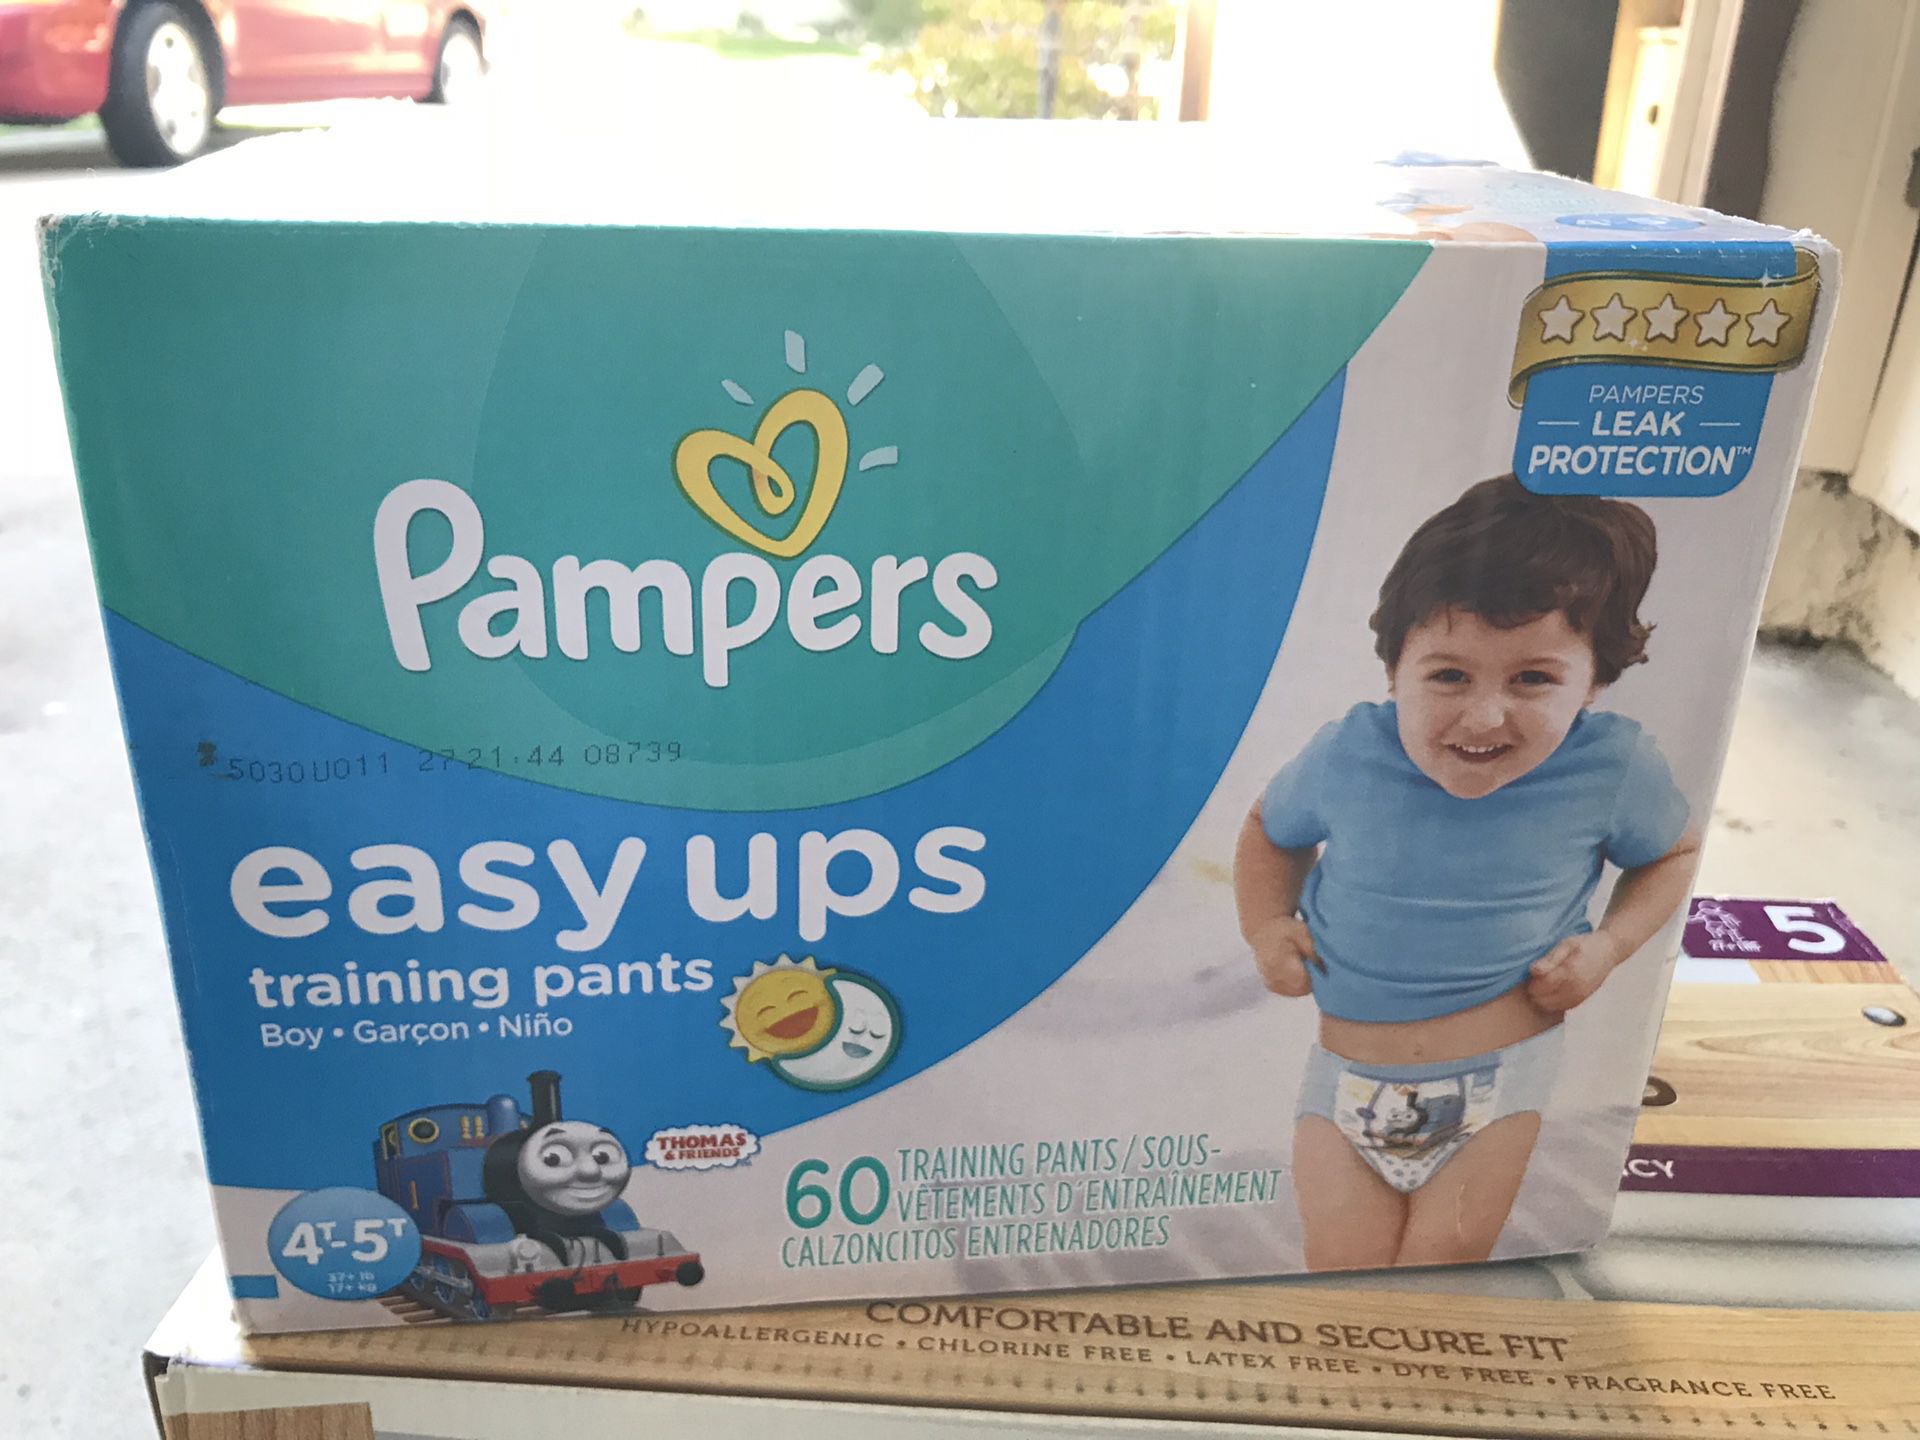 Pampers Easy Ups Hello Kitty Training Pants Size 4T–5T, 60 ct